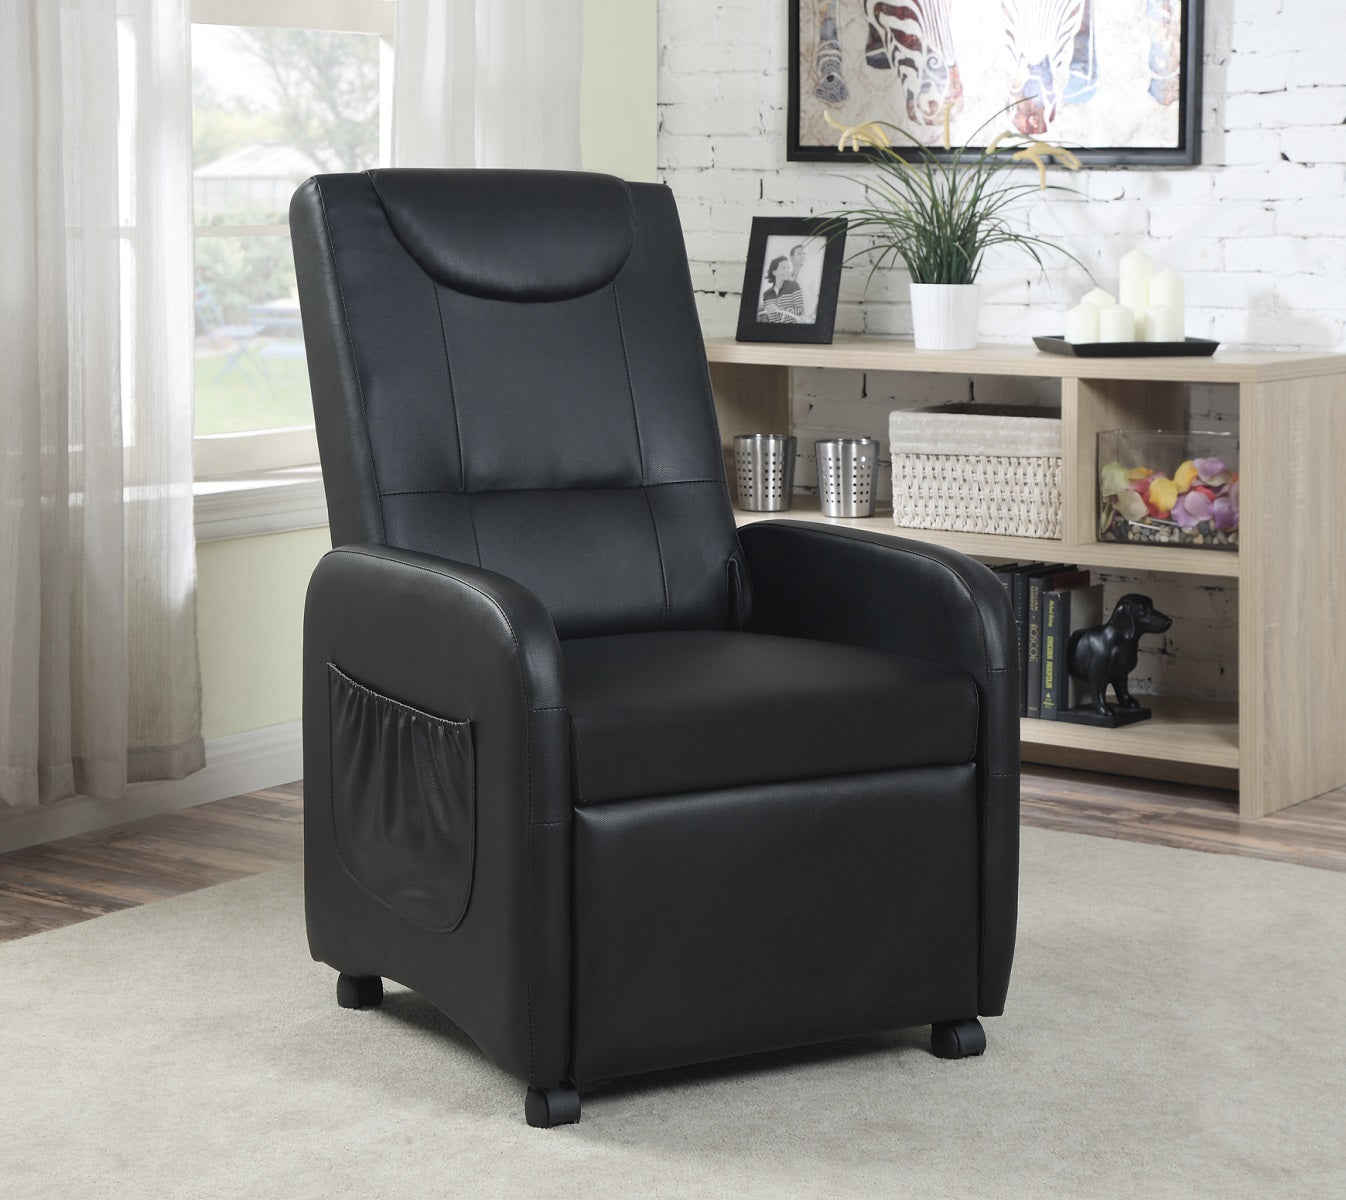 ViscoLogic Folding Gaming Faux Leather Manual Reclining Living Room Chaise Sofa Recliner Chair (Black)